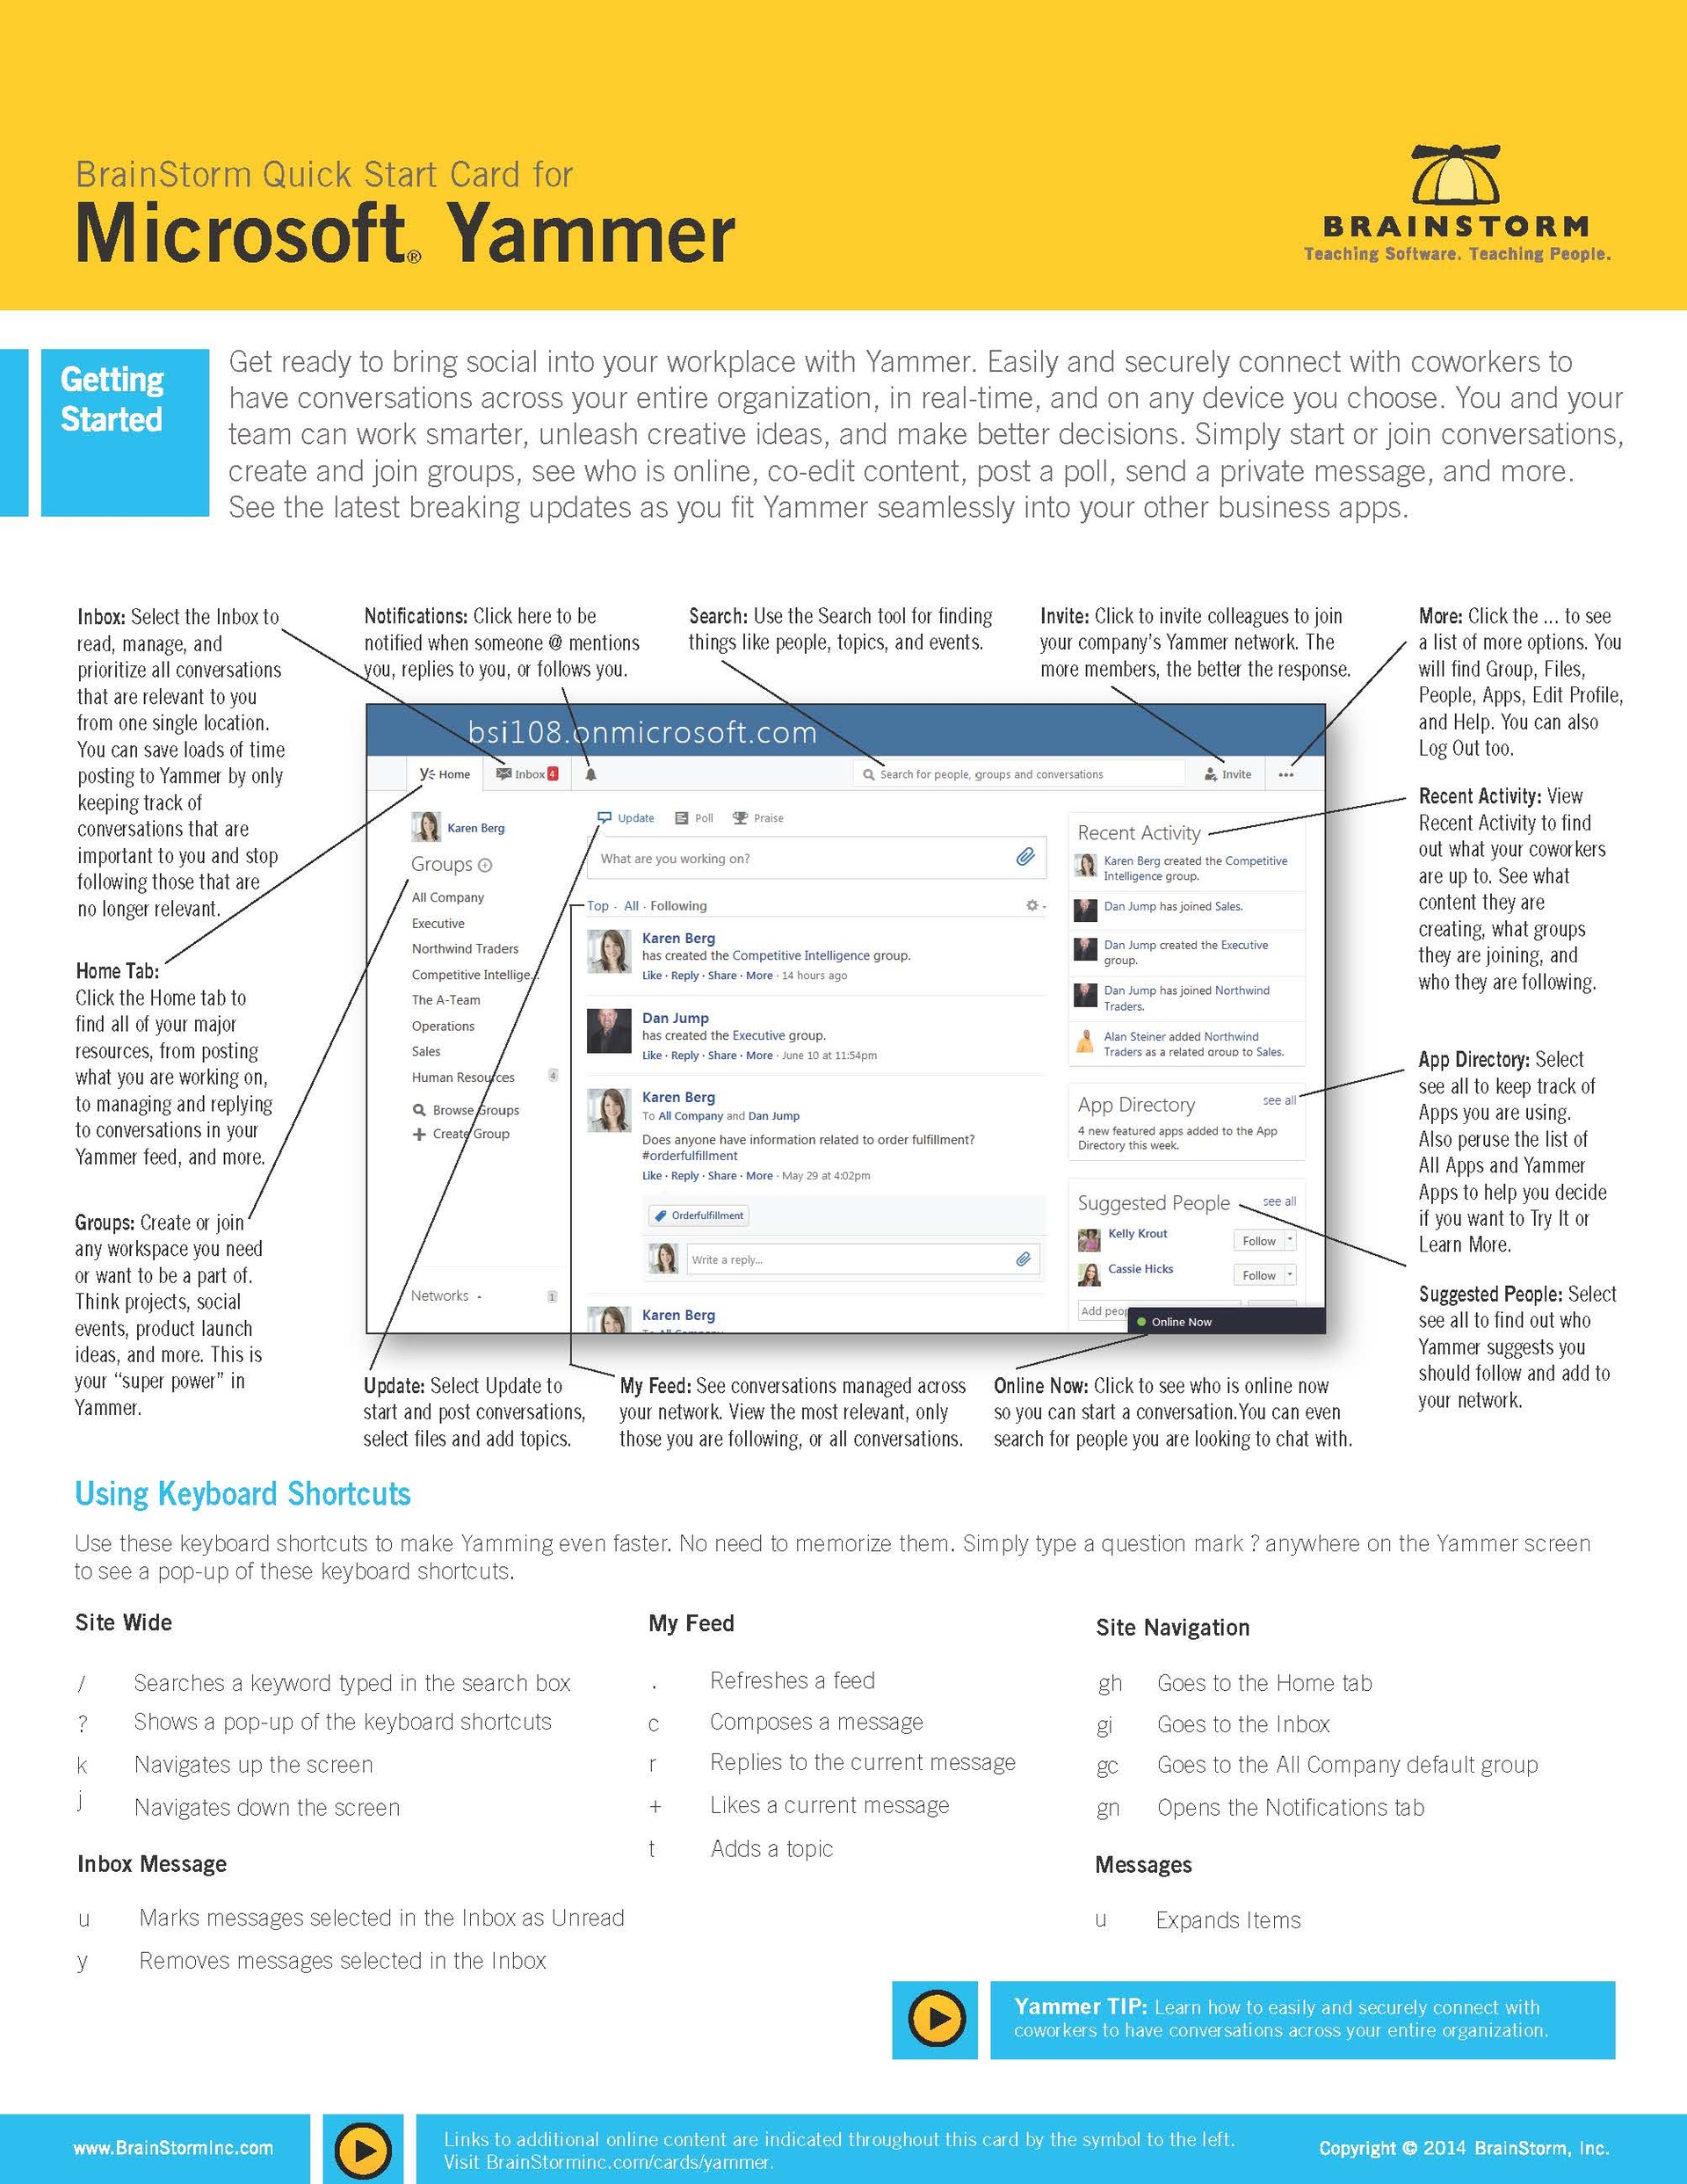 Quick start card of features and process of MS Yammer